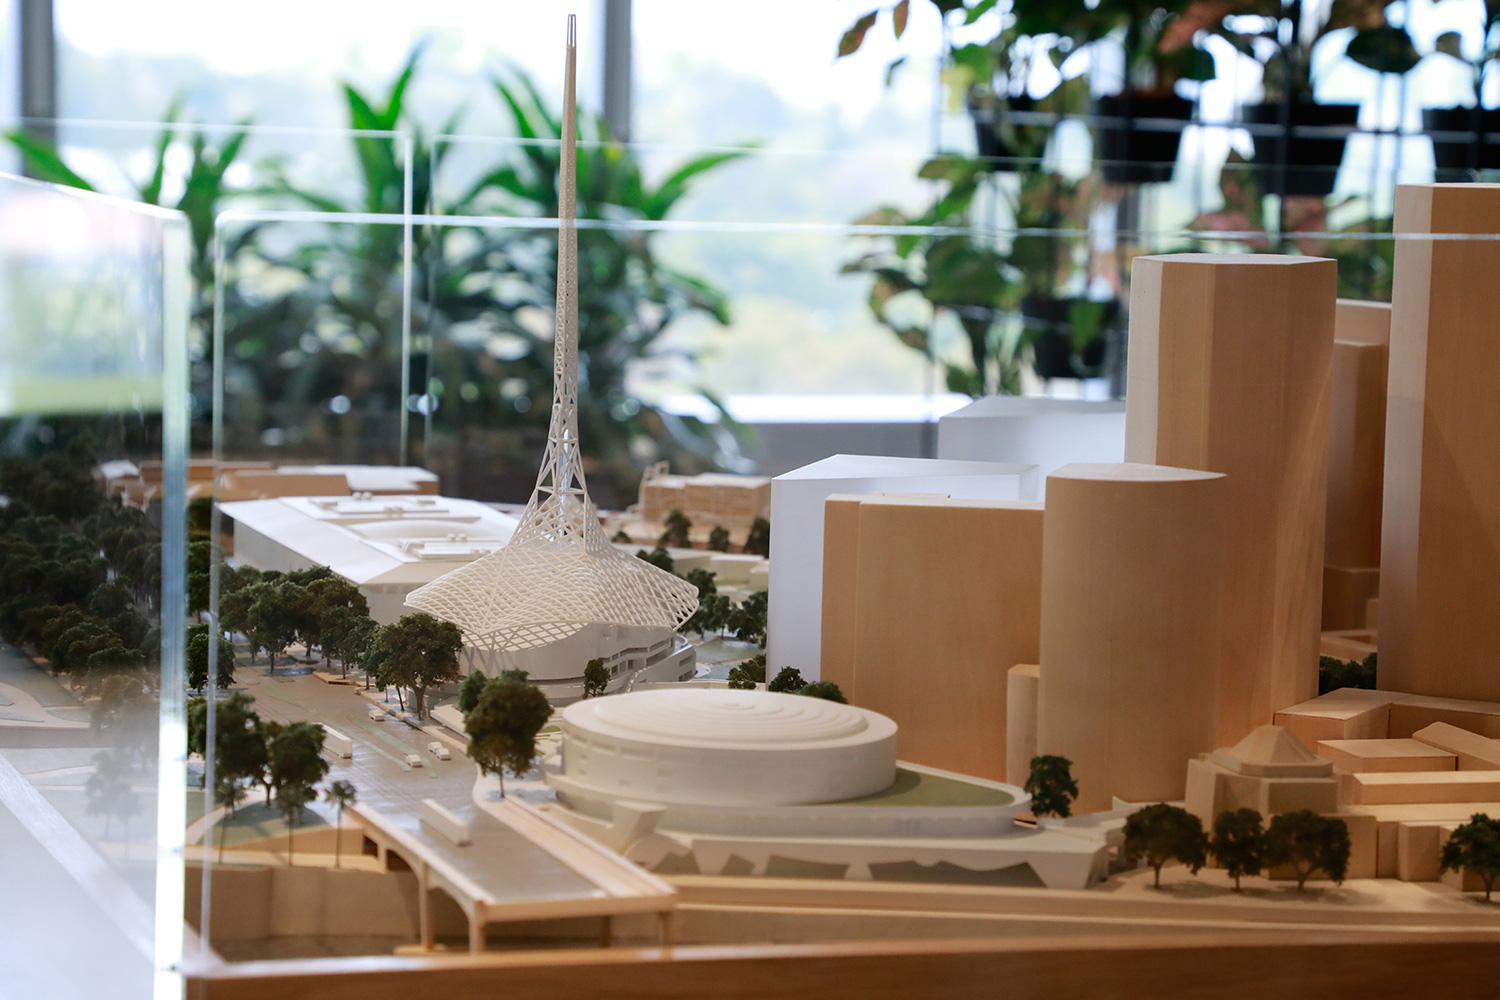 Both a Presentation and Exhibition Model for The National Gallery of Victoria at 1:500